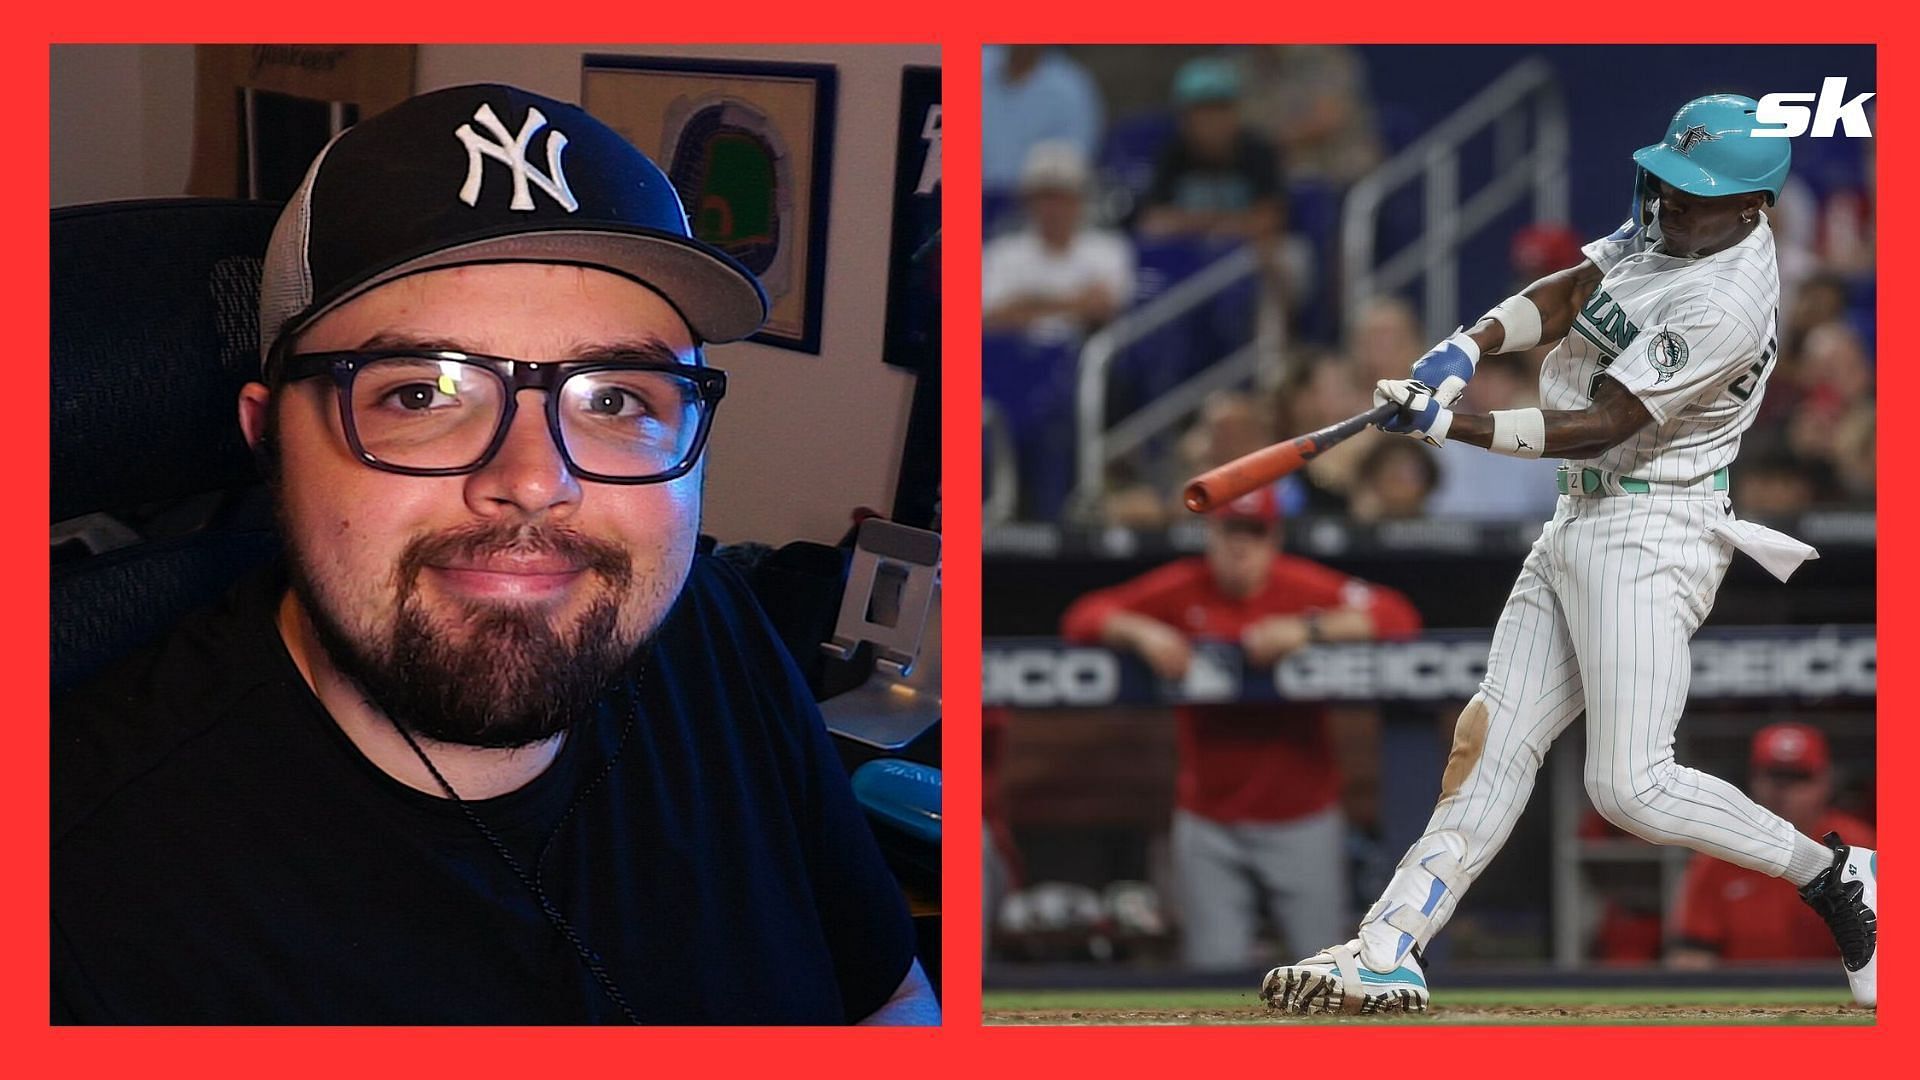 How to enter &lsquo;The Scann Community Series&rsquo; in MLB the Show 23